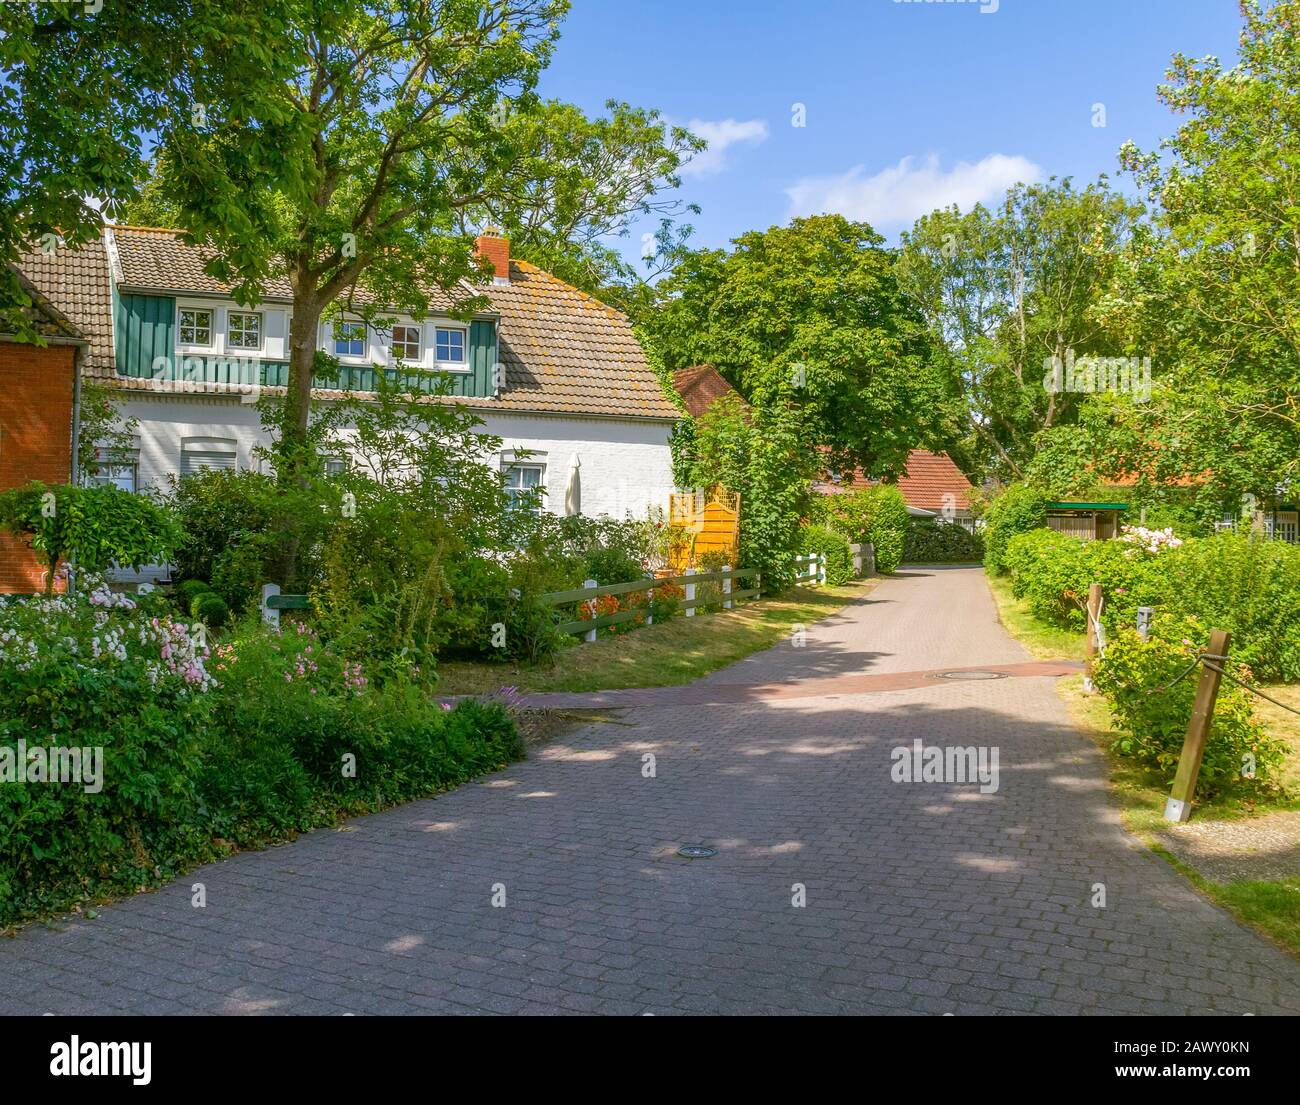 impression of Spiekeroog village which is located at Spiekeroog island, one of the East Frisian Islands at the North Sea coast of Germany Stock Photo